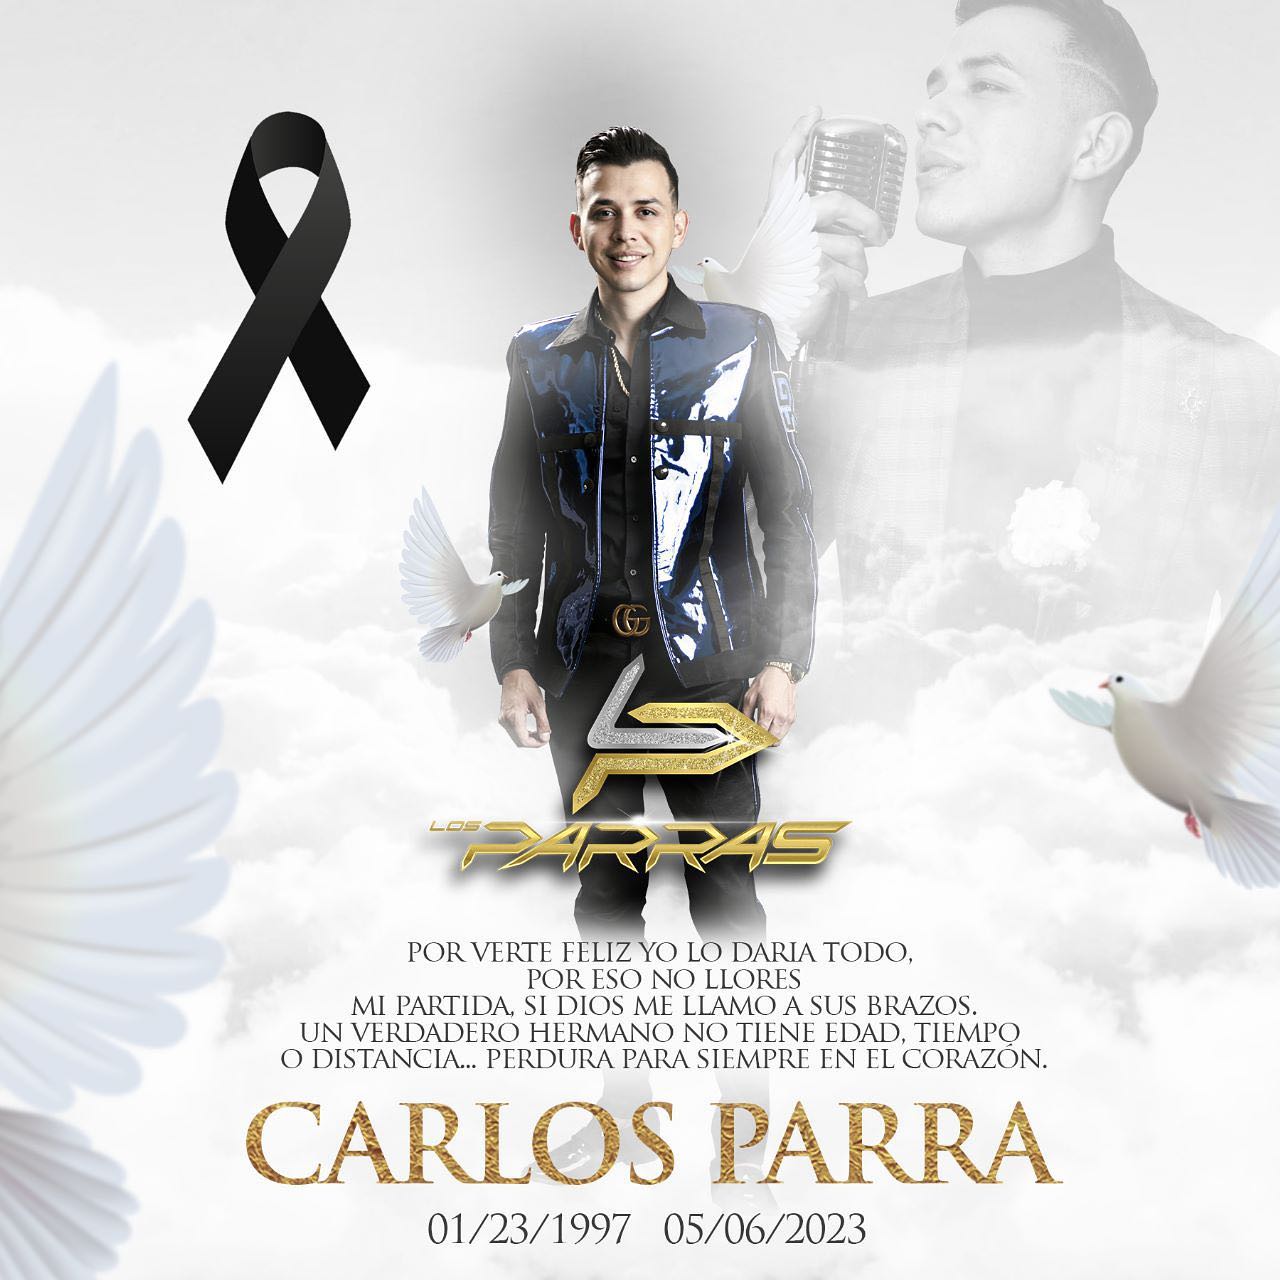 This was the obituary that the Parras shared about their partner (Instagram/@losparras_official)